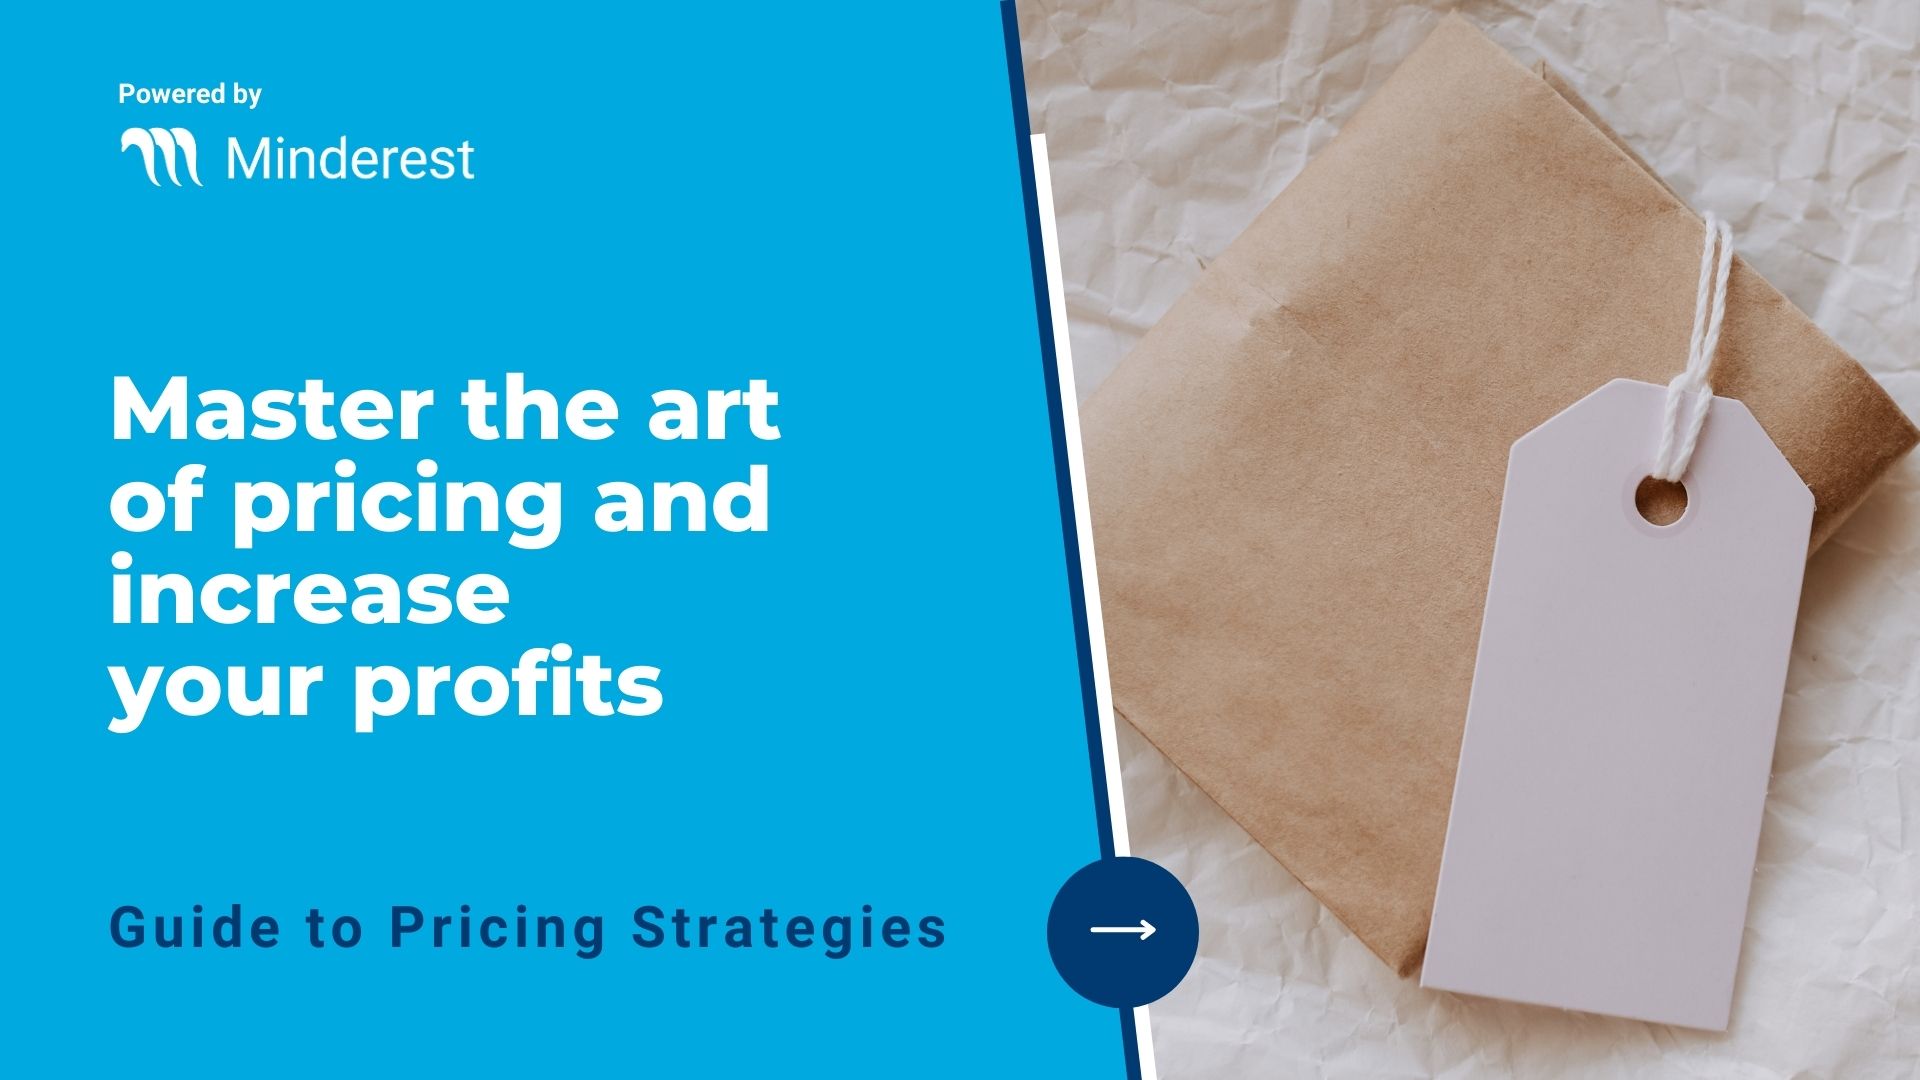 Guide: Master the art of pricing - Minderest